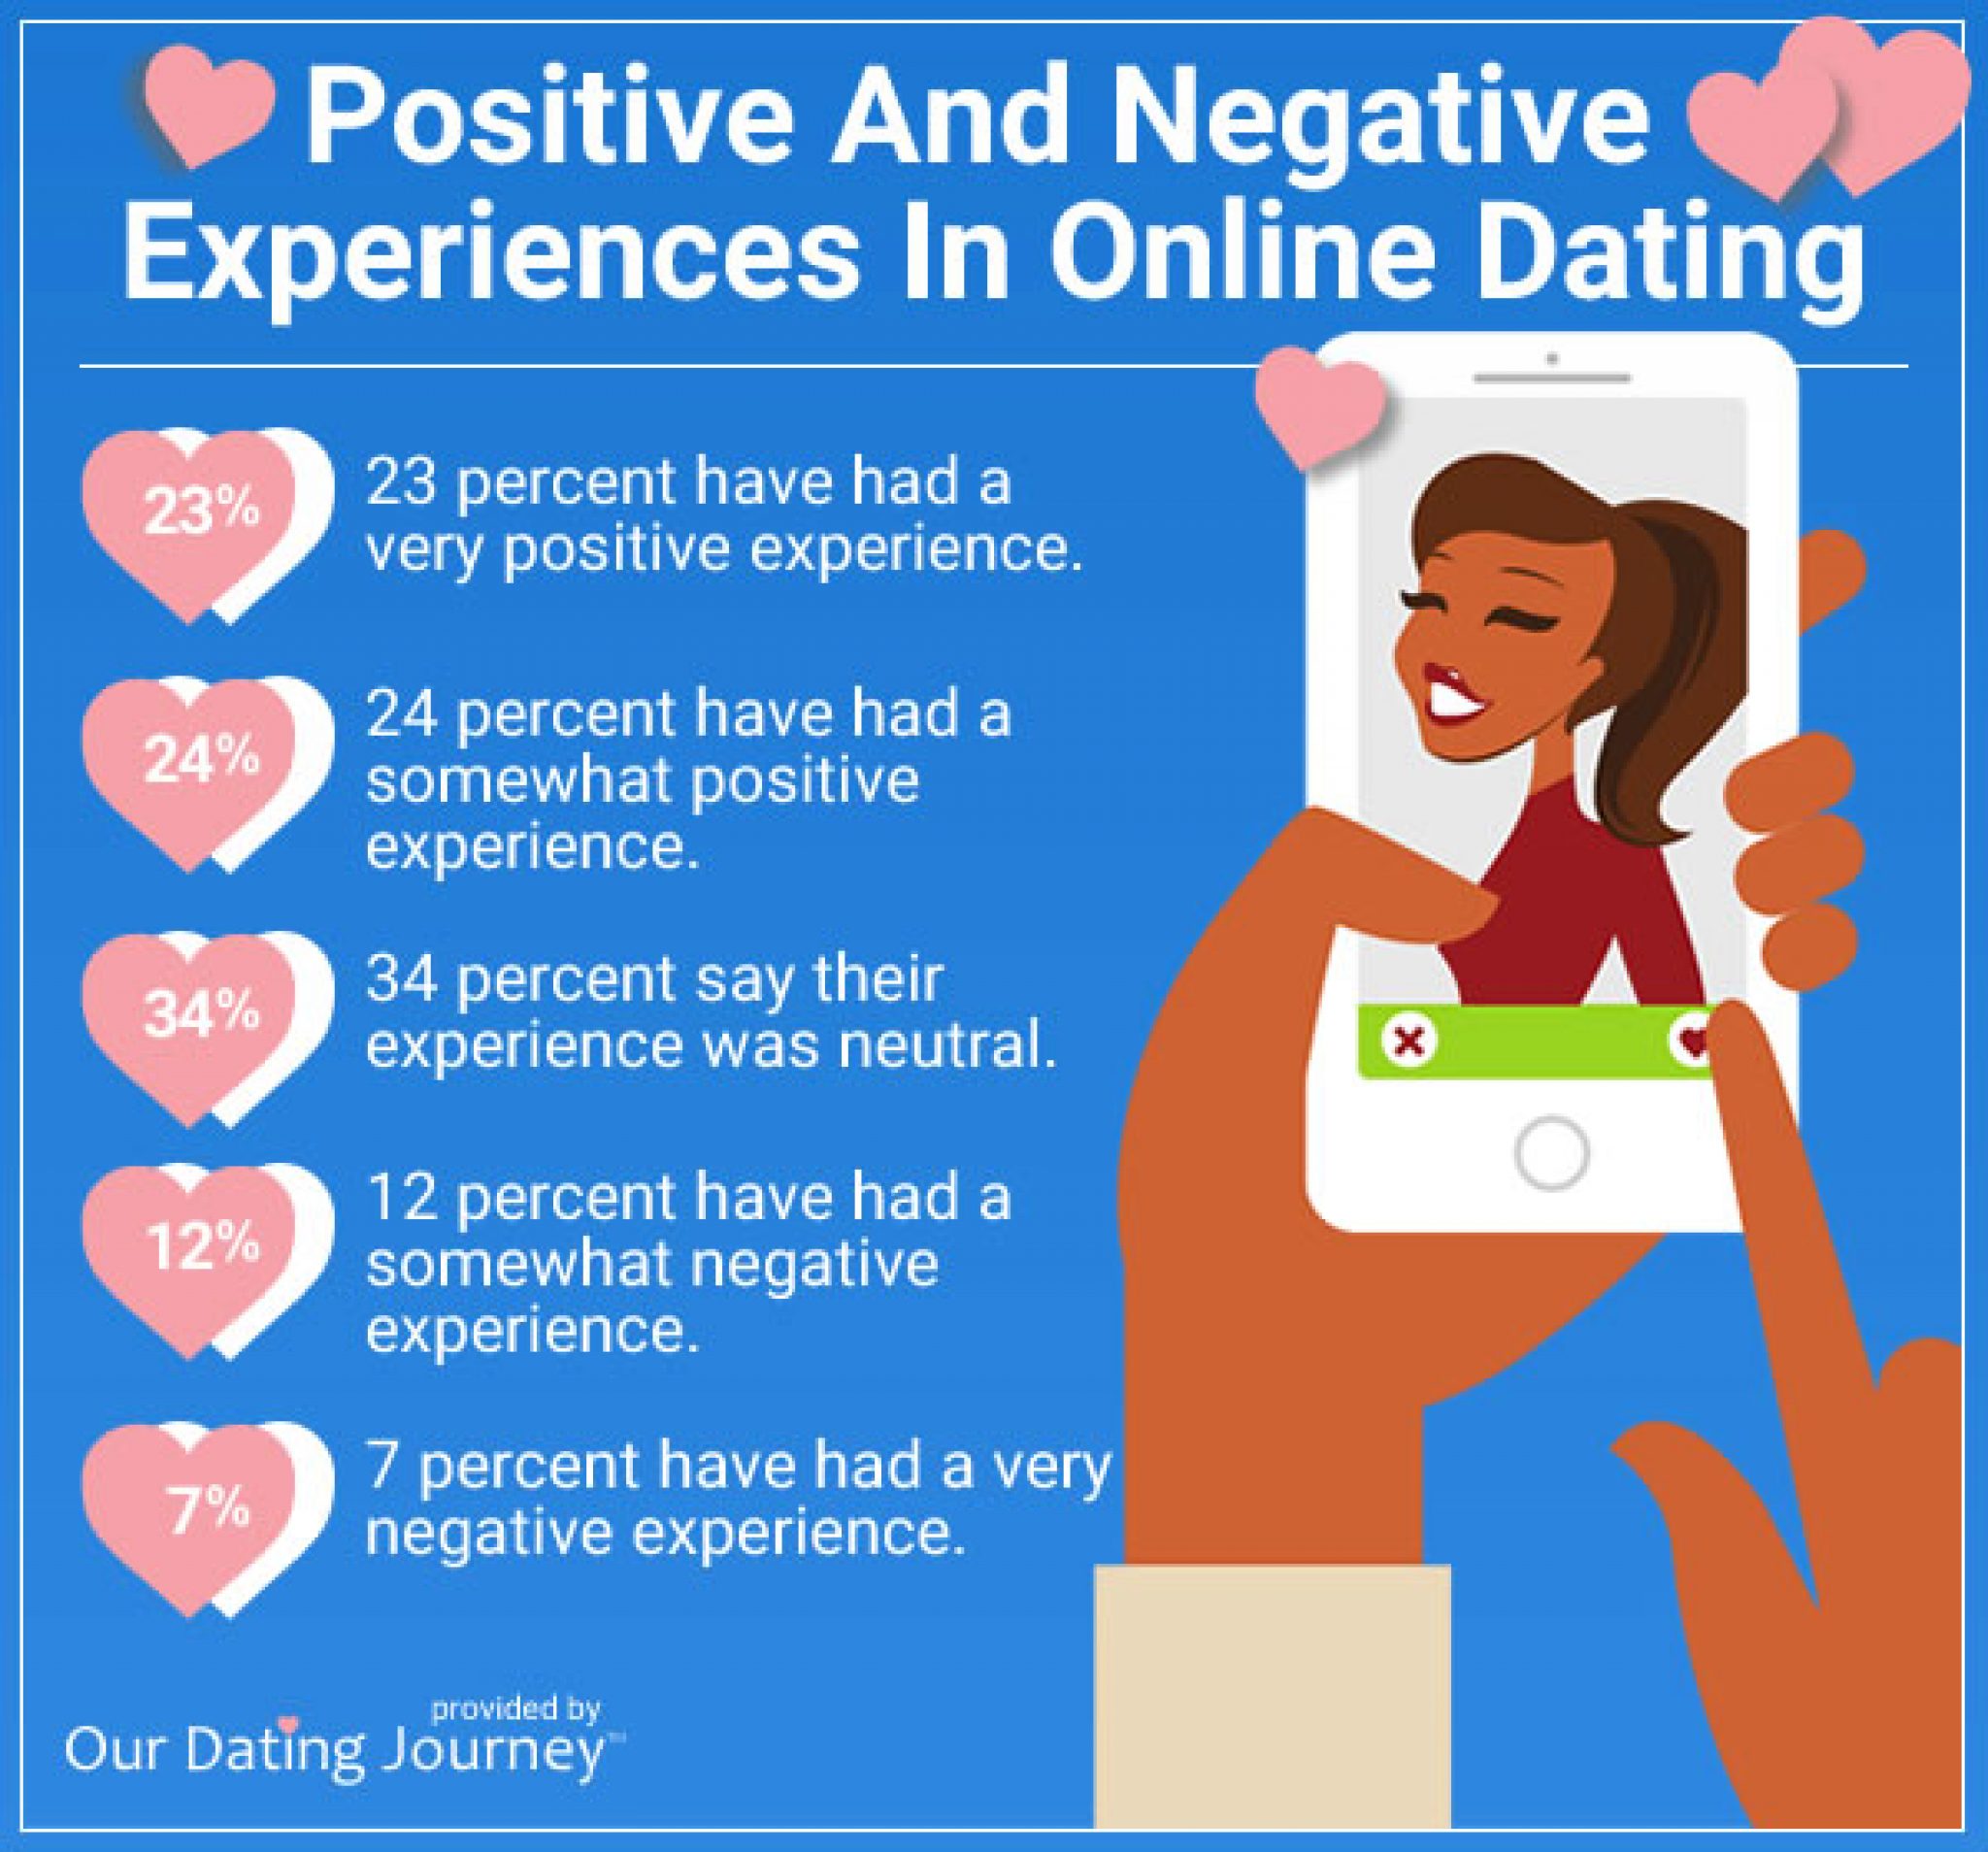 5 facts about online dating | Pew Research Center